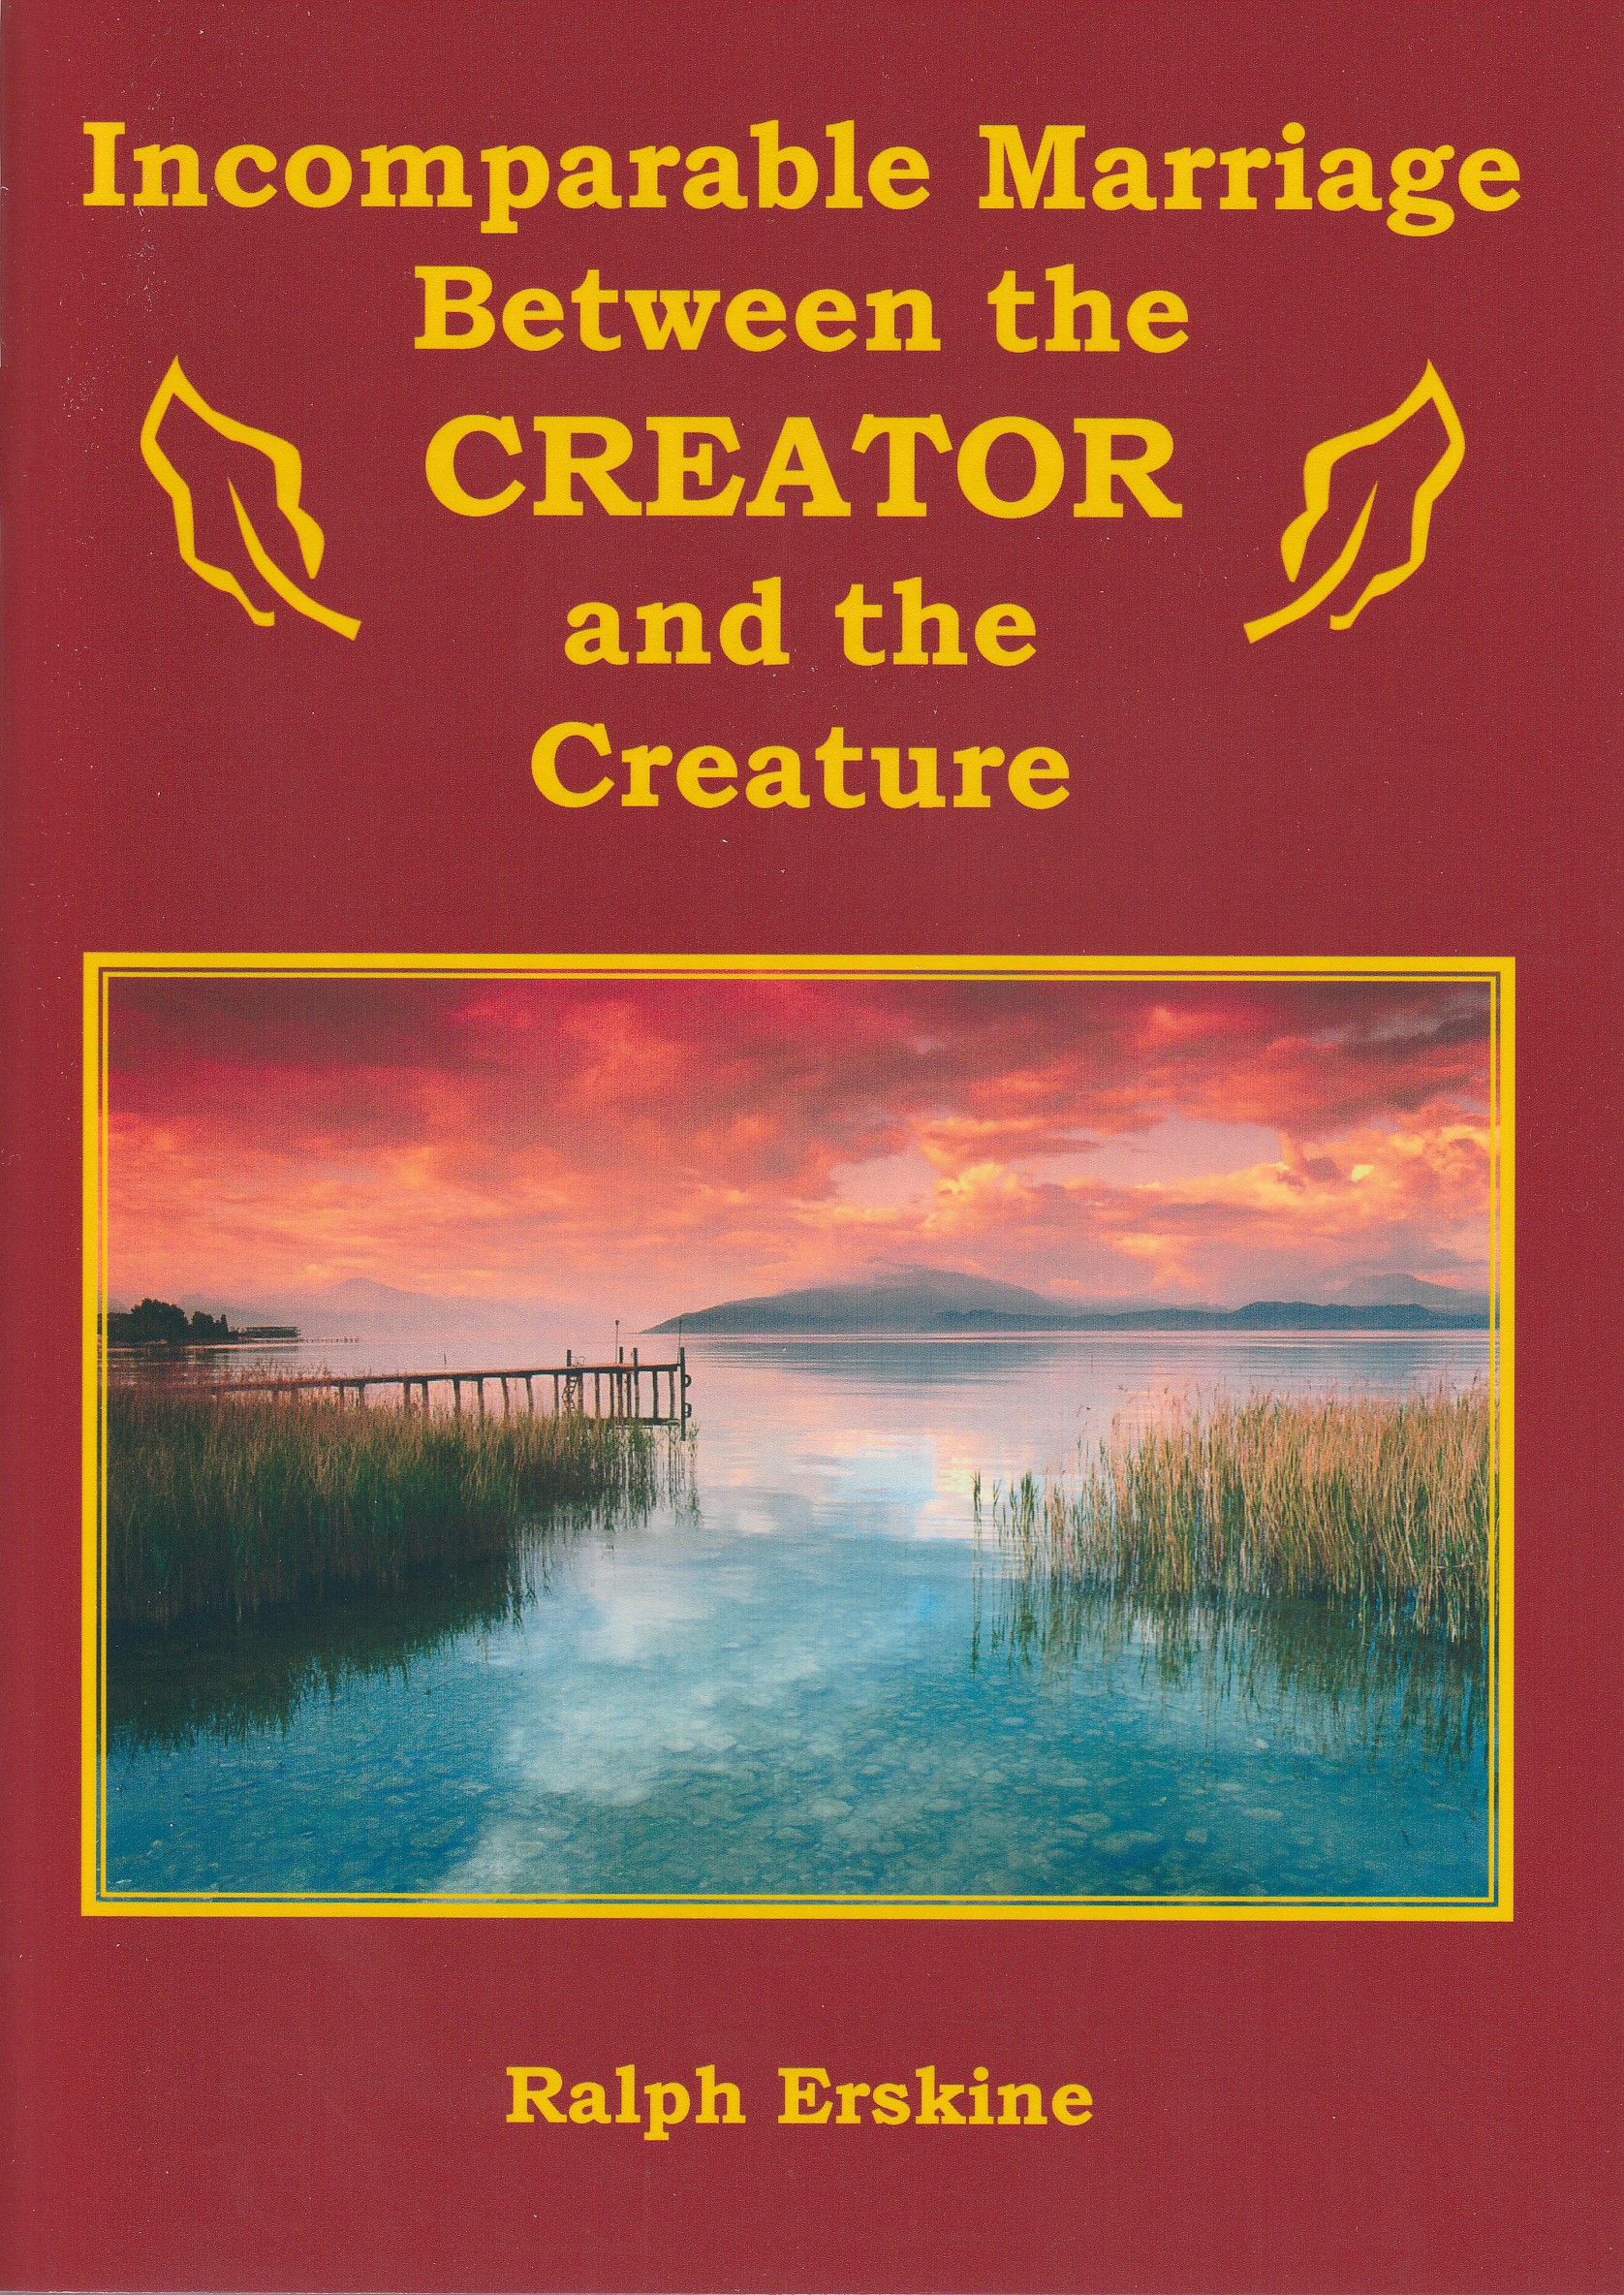 Incomparable Marriage between the Creator and the Creature